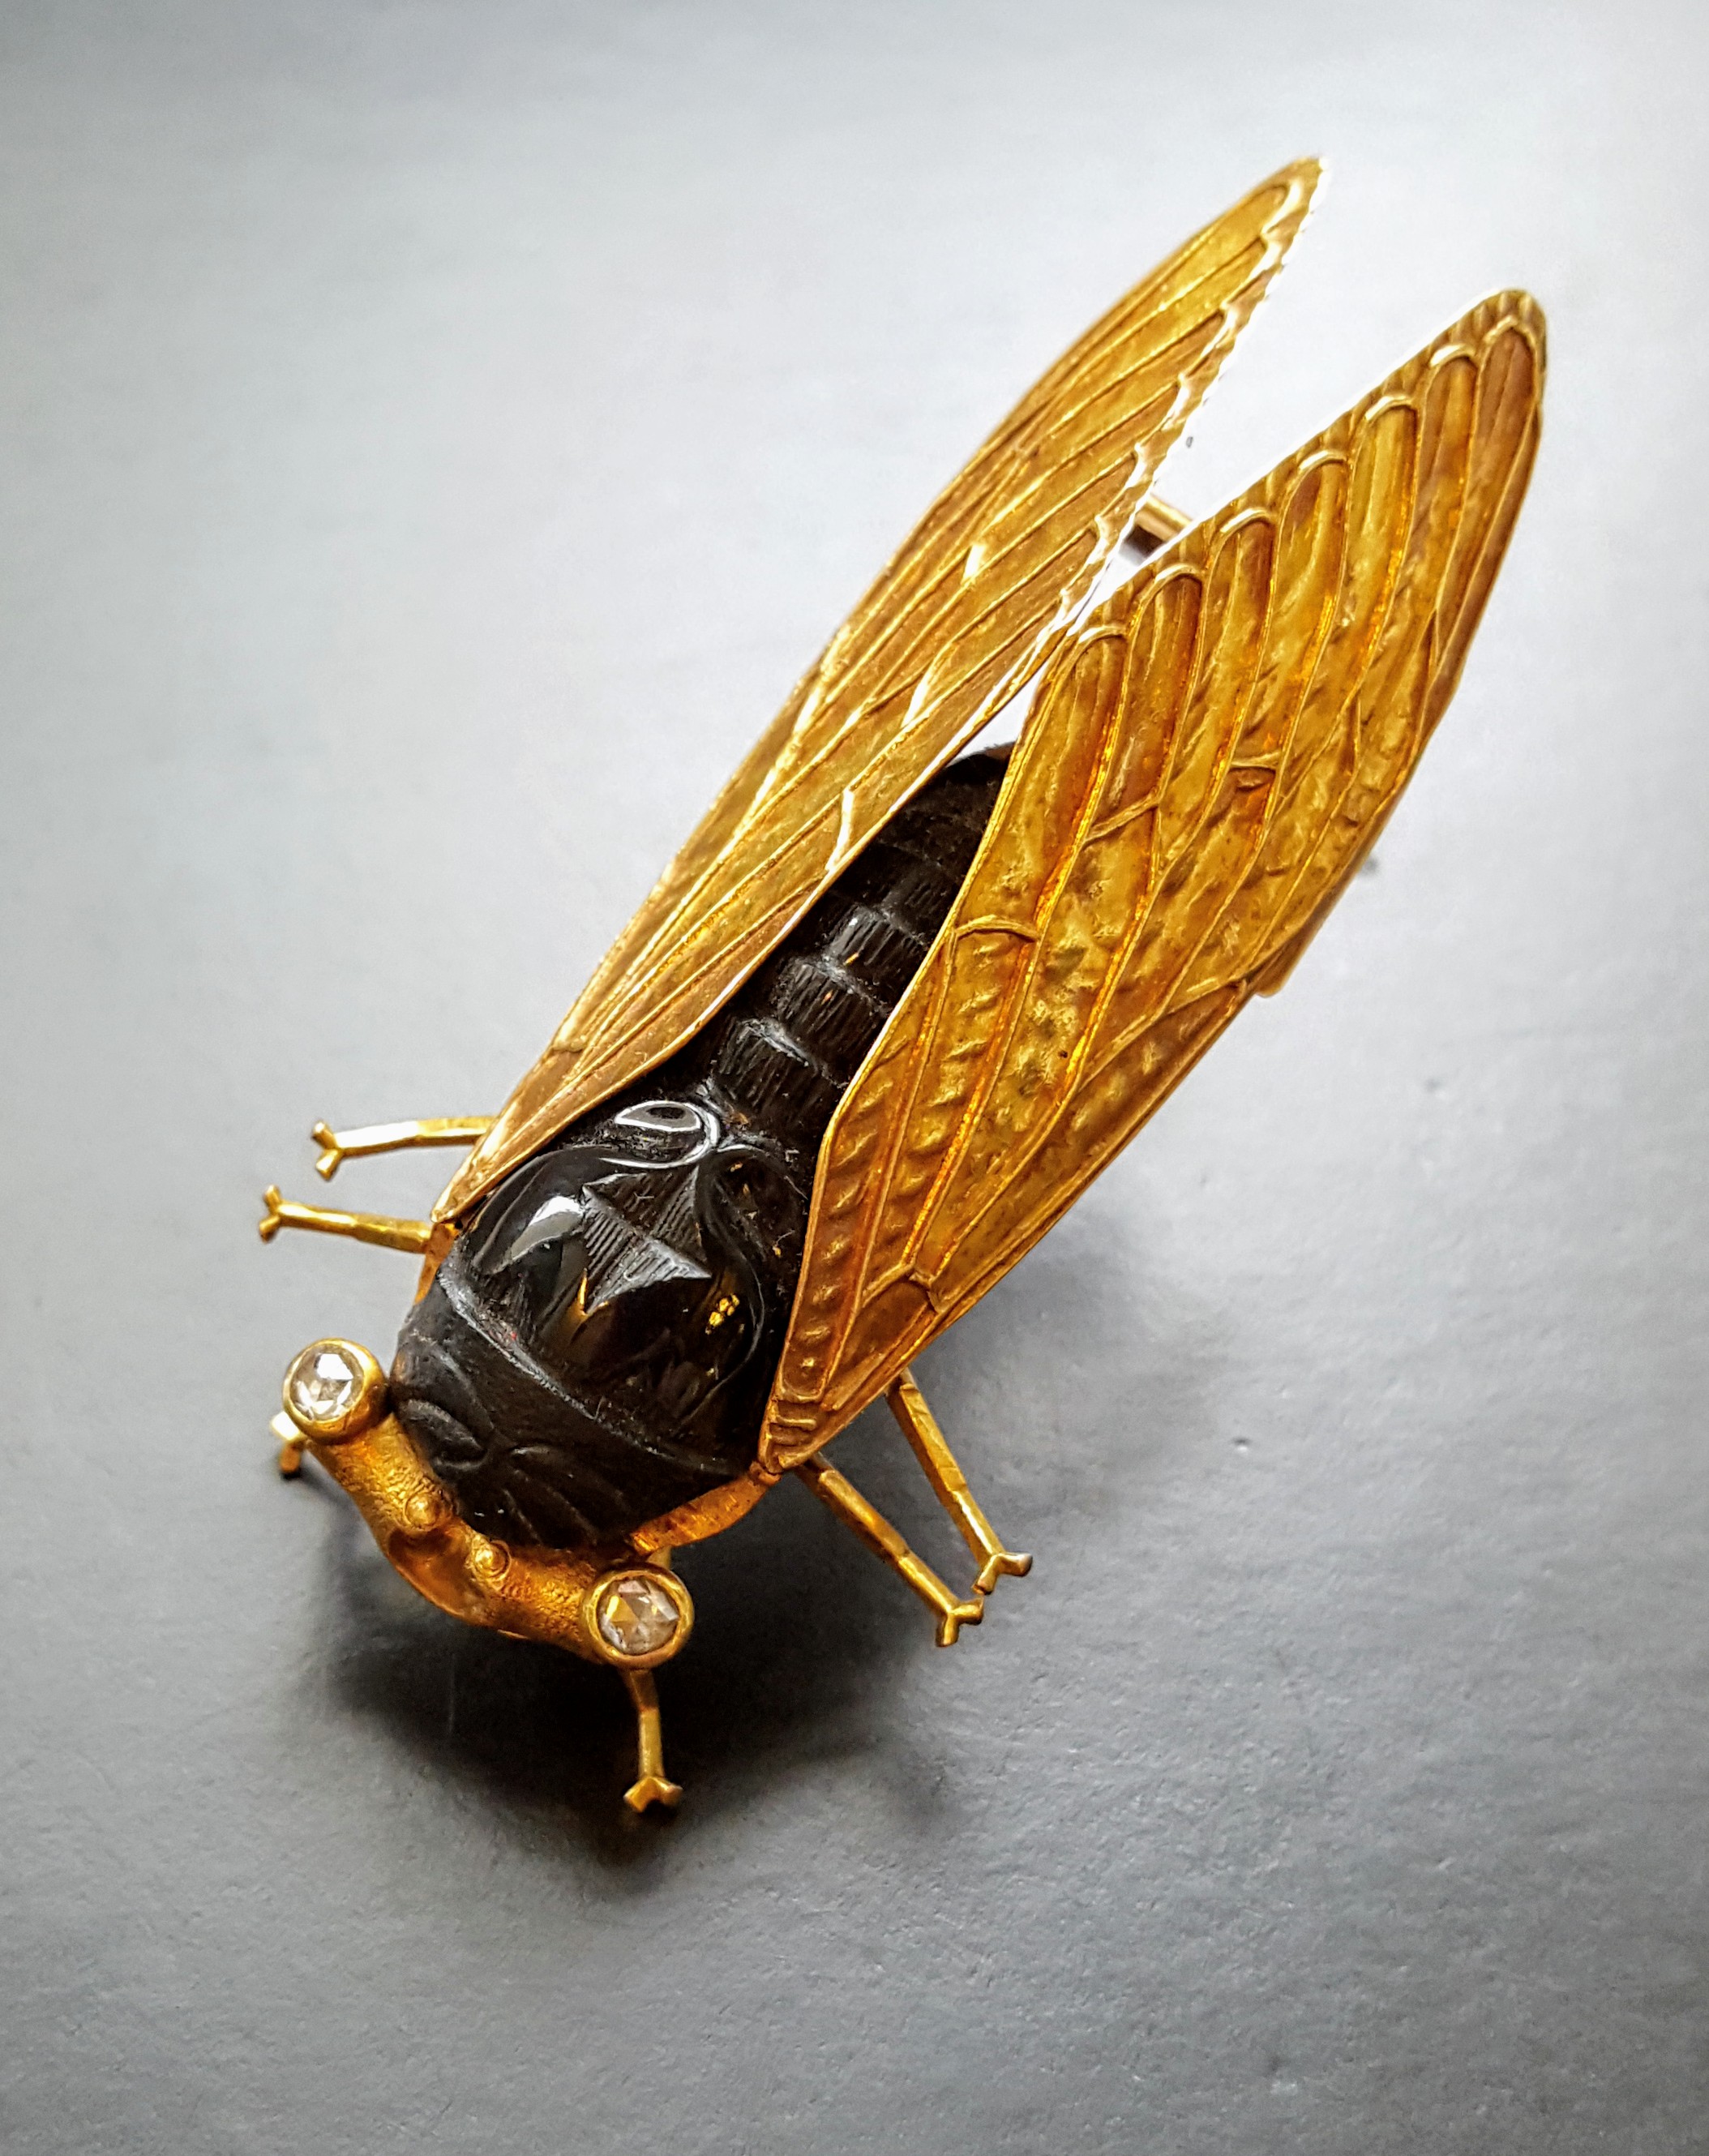 La Espoir Insect Cicada Beetle Brooches Antique Gold Metal Female Badge Brooch Jewelry 